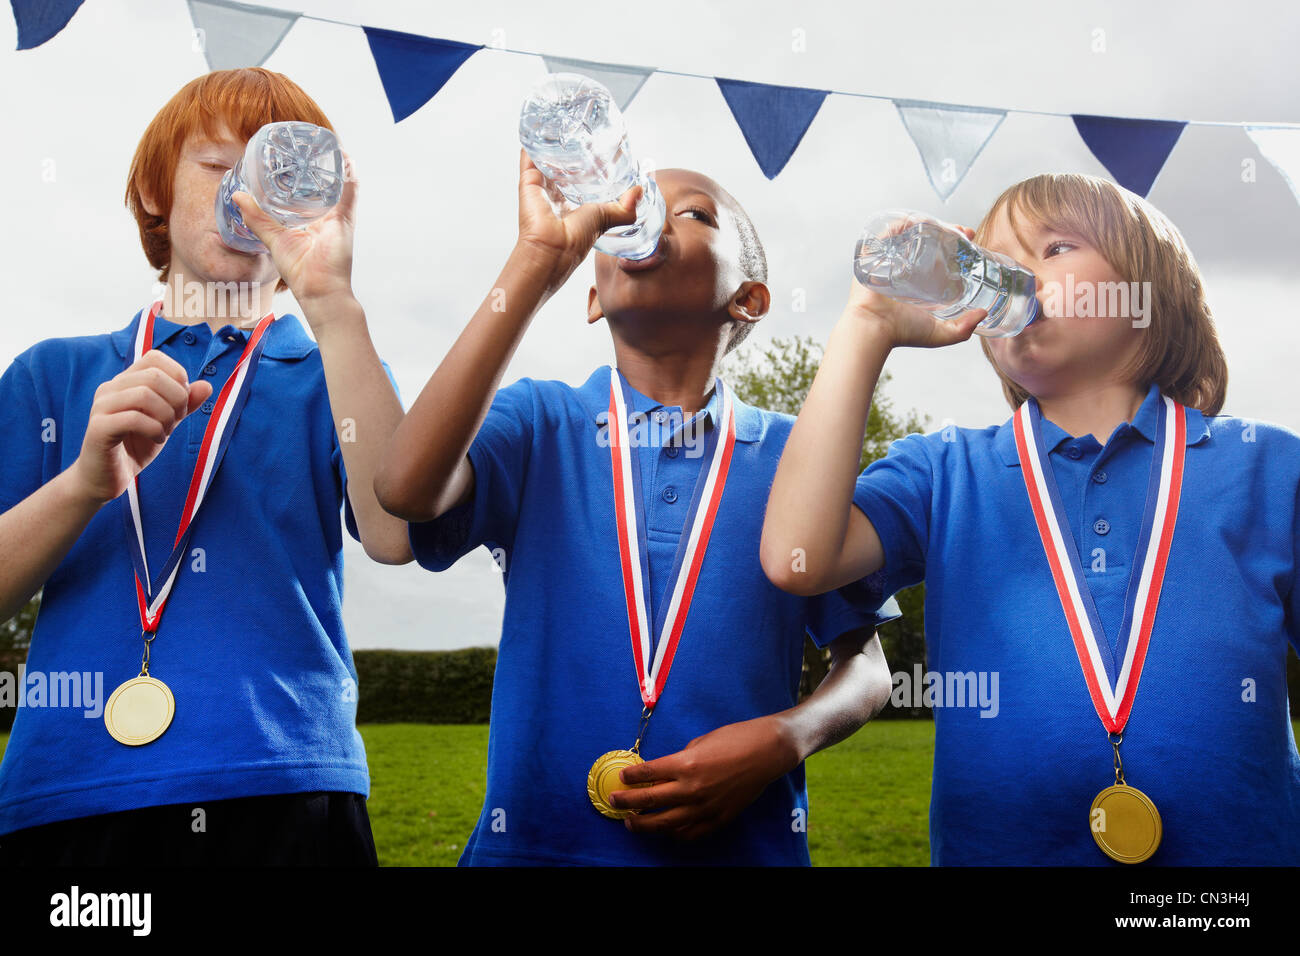 School boys with medals drinking water after sports event Stock Photo